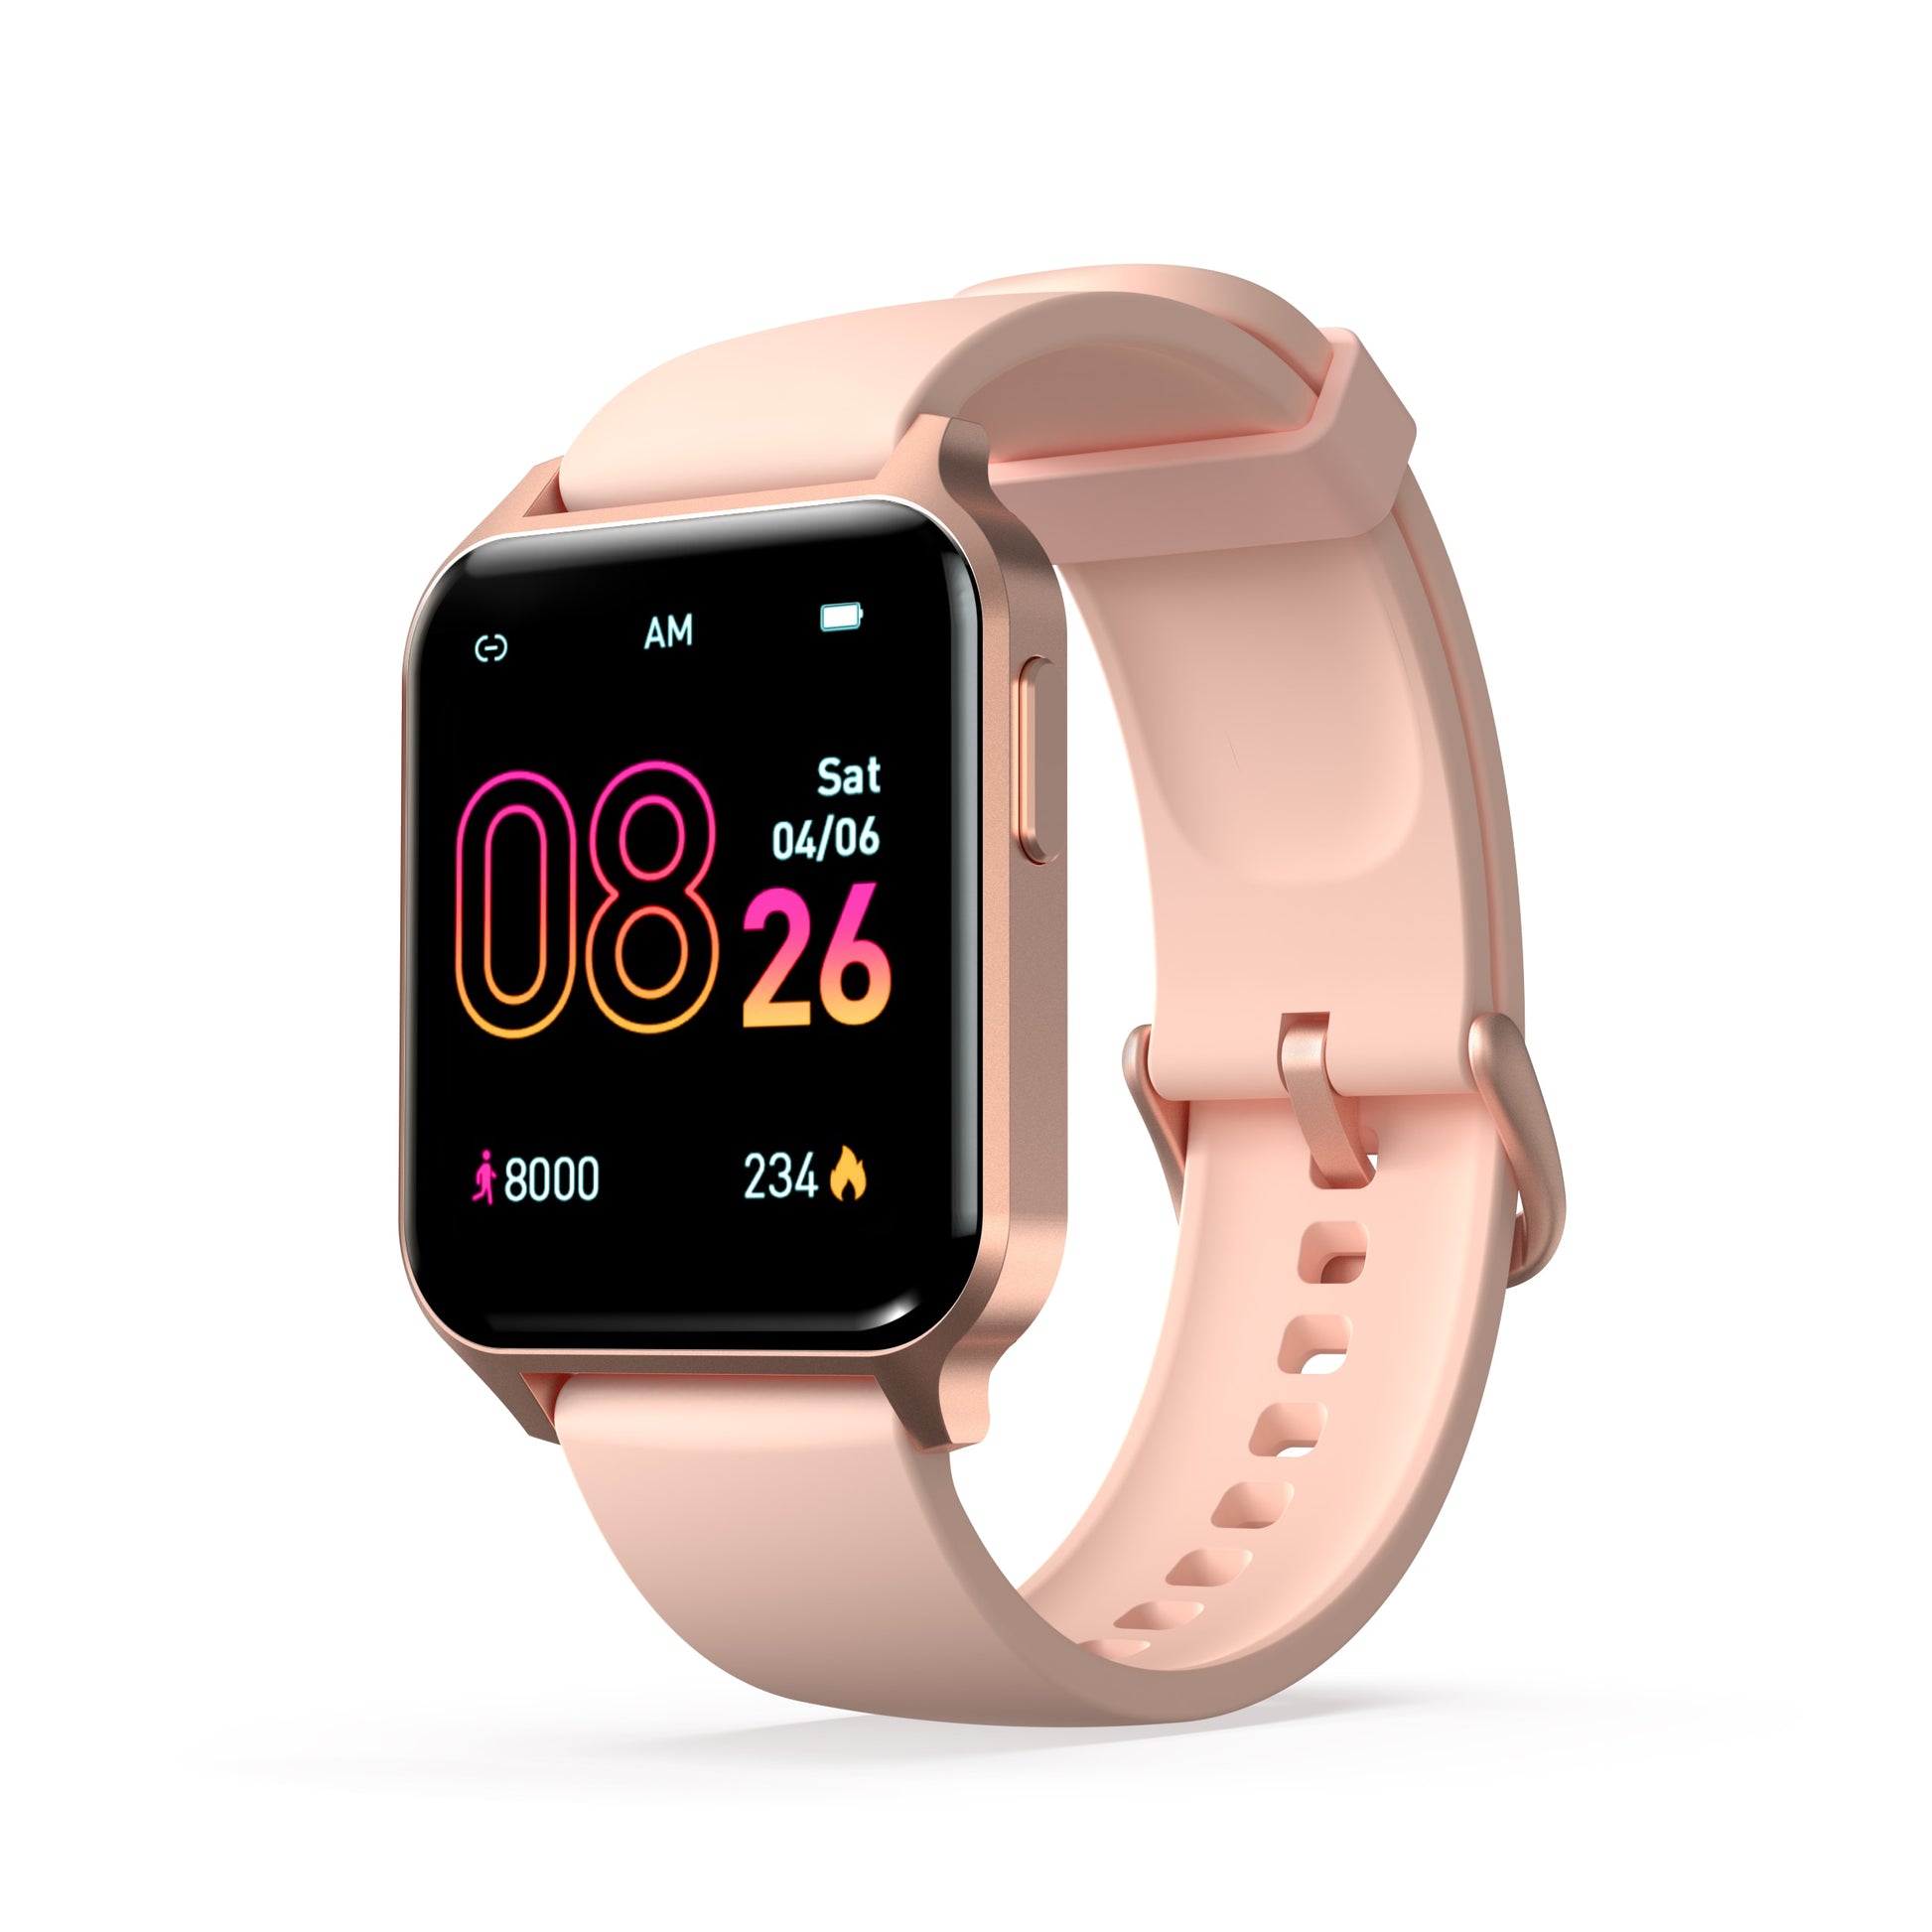 Smart Watch Bluetooth Fitness Tracker for iPhone Android in Gold Close Up - Thefitnesshut.com